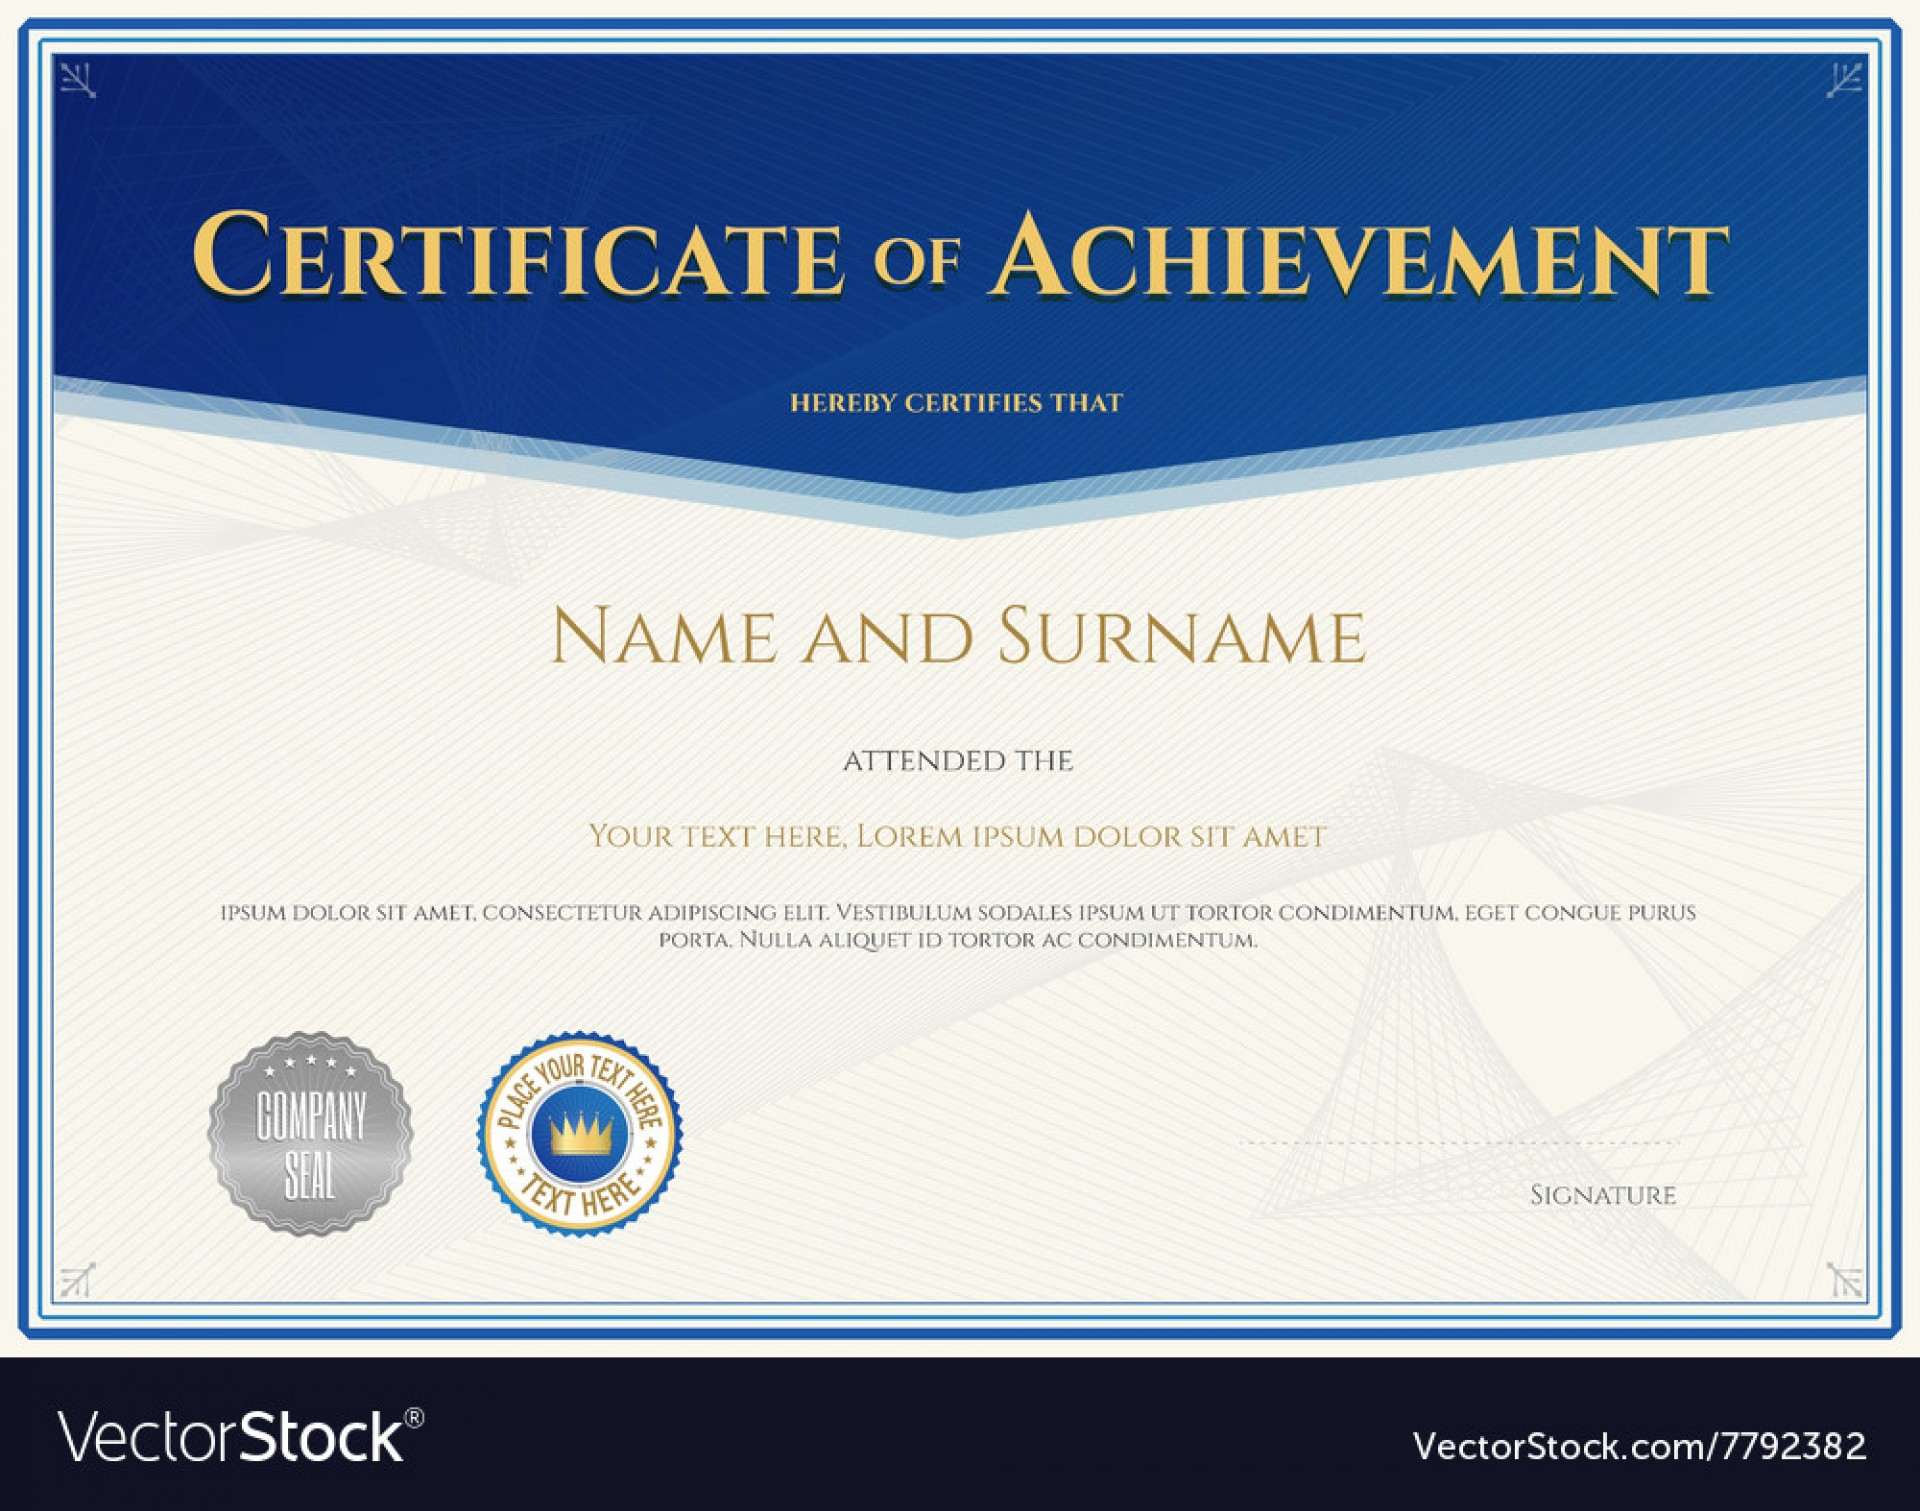 003 Certificate Of Achievement Template Free Ideas Intended For Certificate Of Accomplishment Template Free